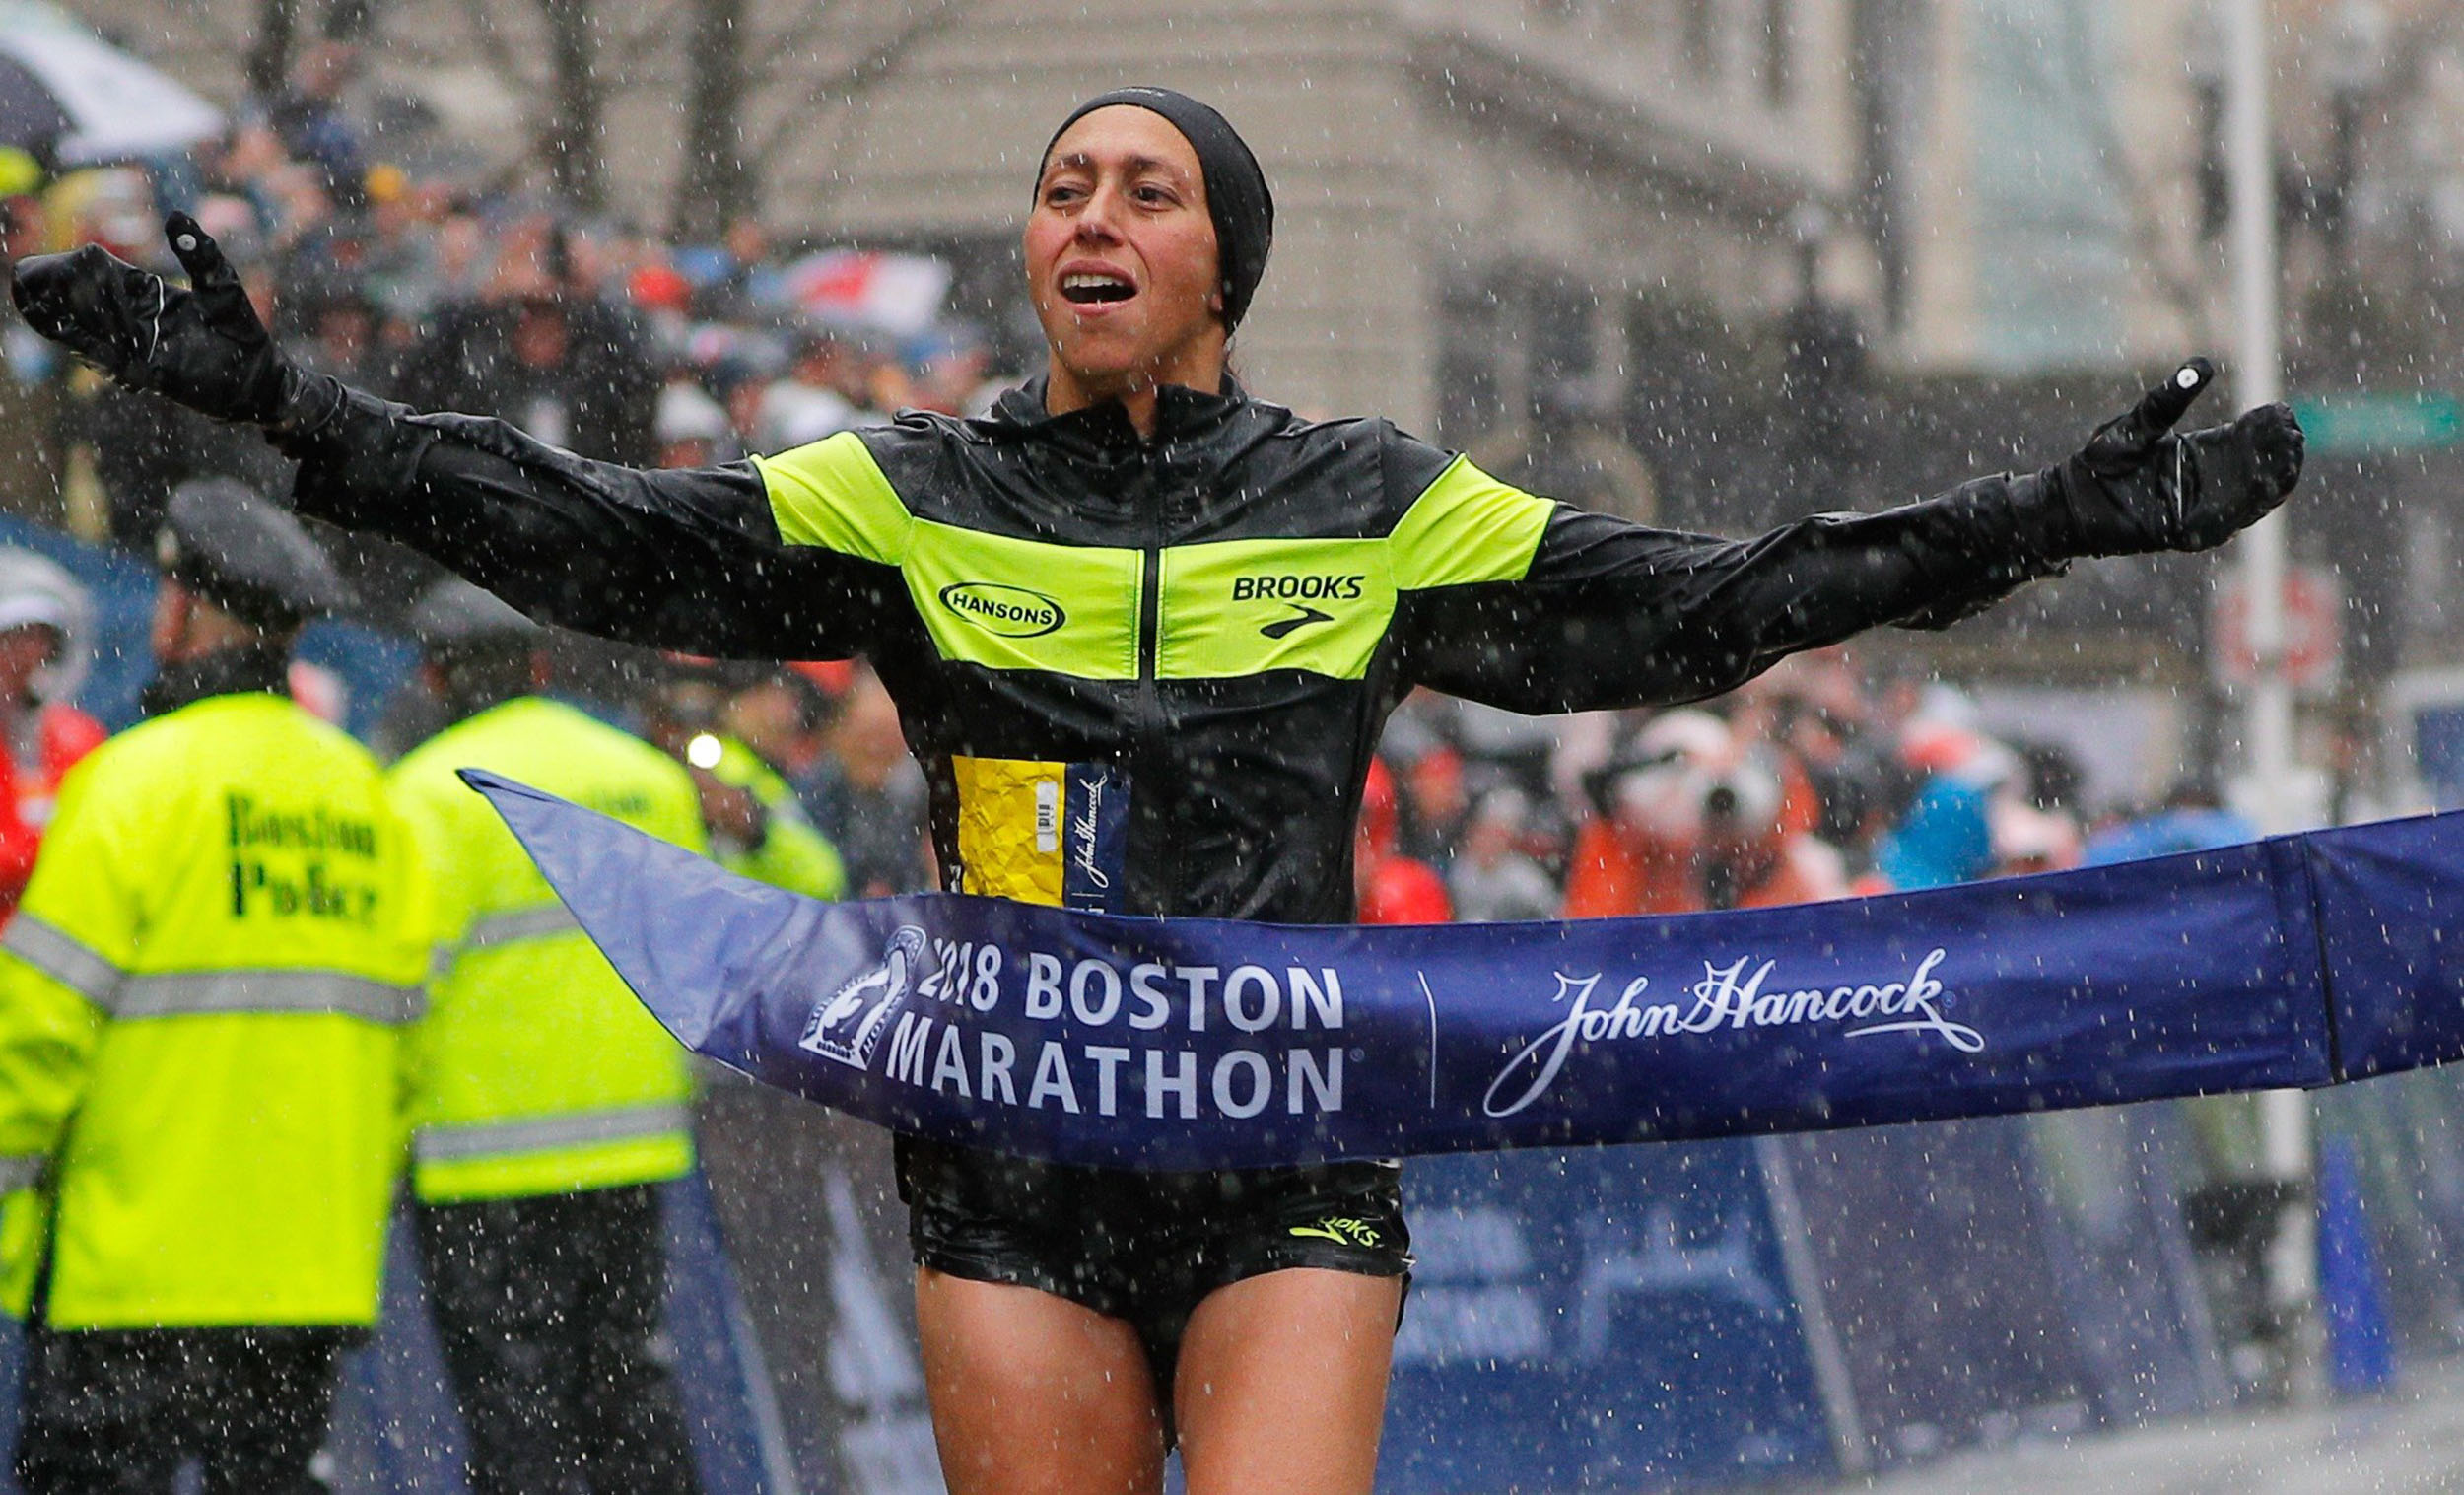 Desiree Linden of the U.S. crosses the finish line to win the women's division of the 122nd Boston Marathon in Boston, Massachusetts, U.S., April 16, 2018. REUTERS/Brian Snyder